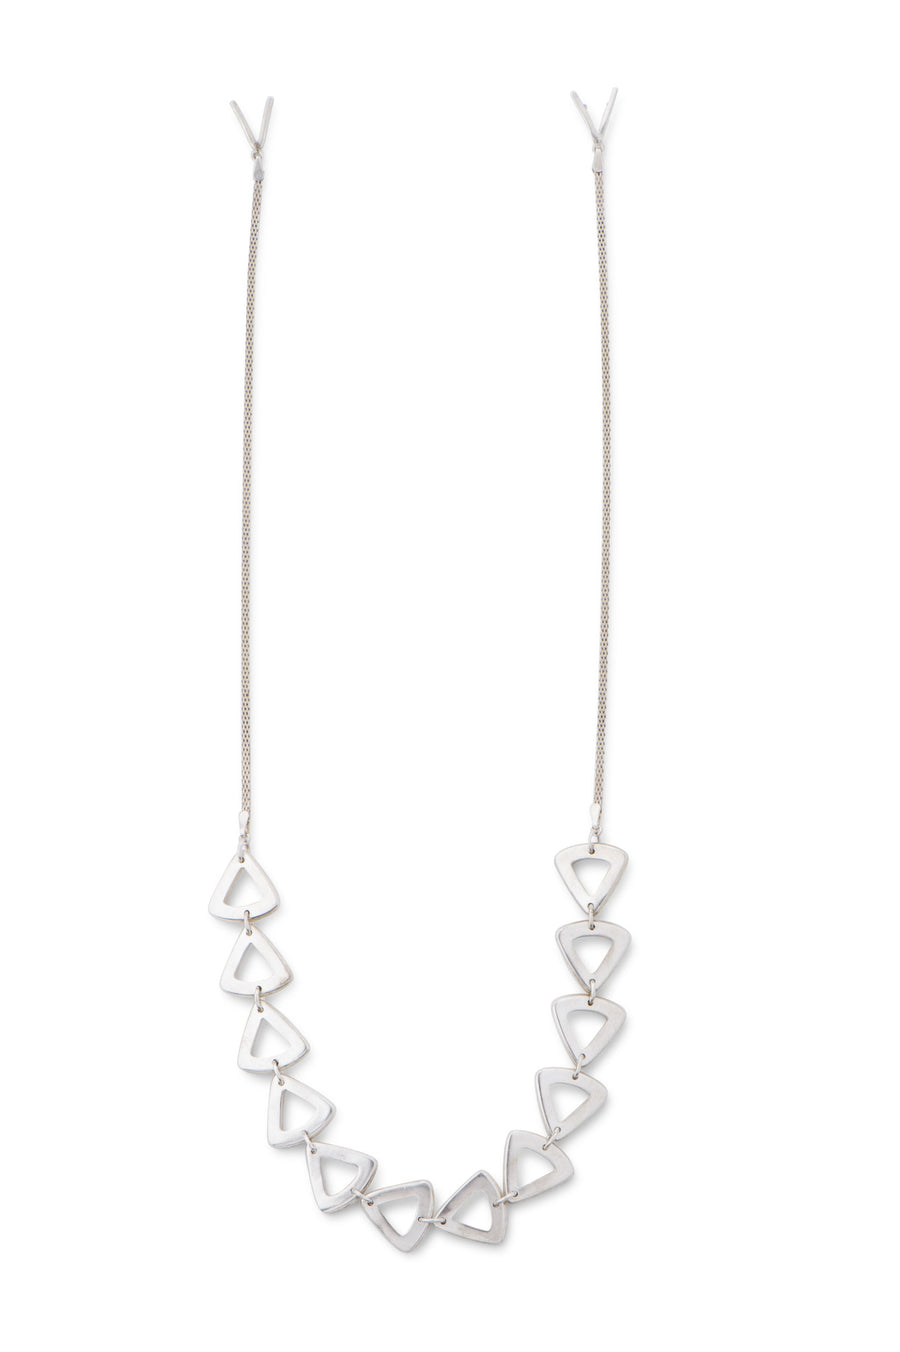 Beveled broadly curved triangles drape across the chest in this demi sterling silver necklace. Handmade by Sky Phaebl.